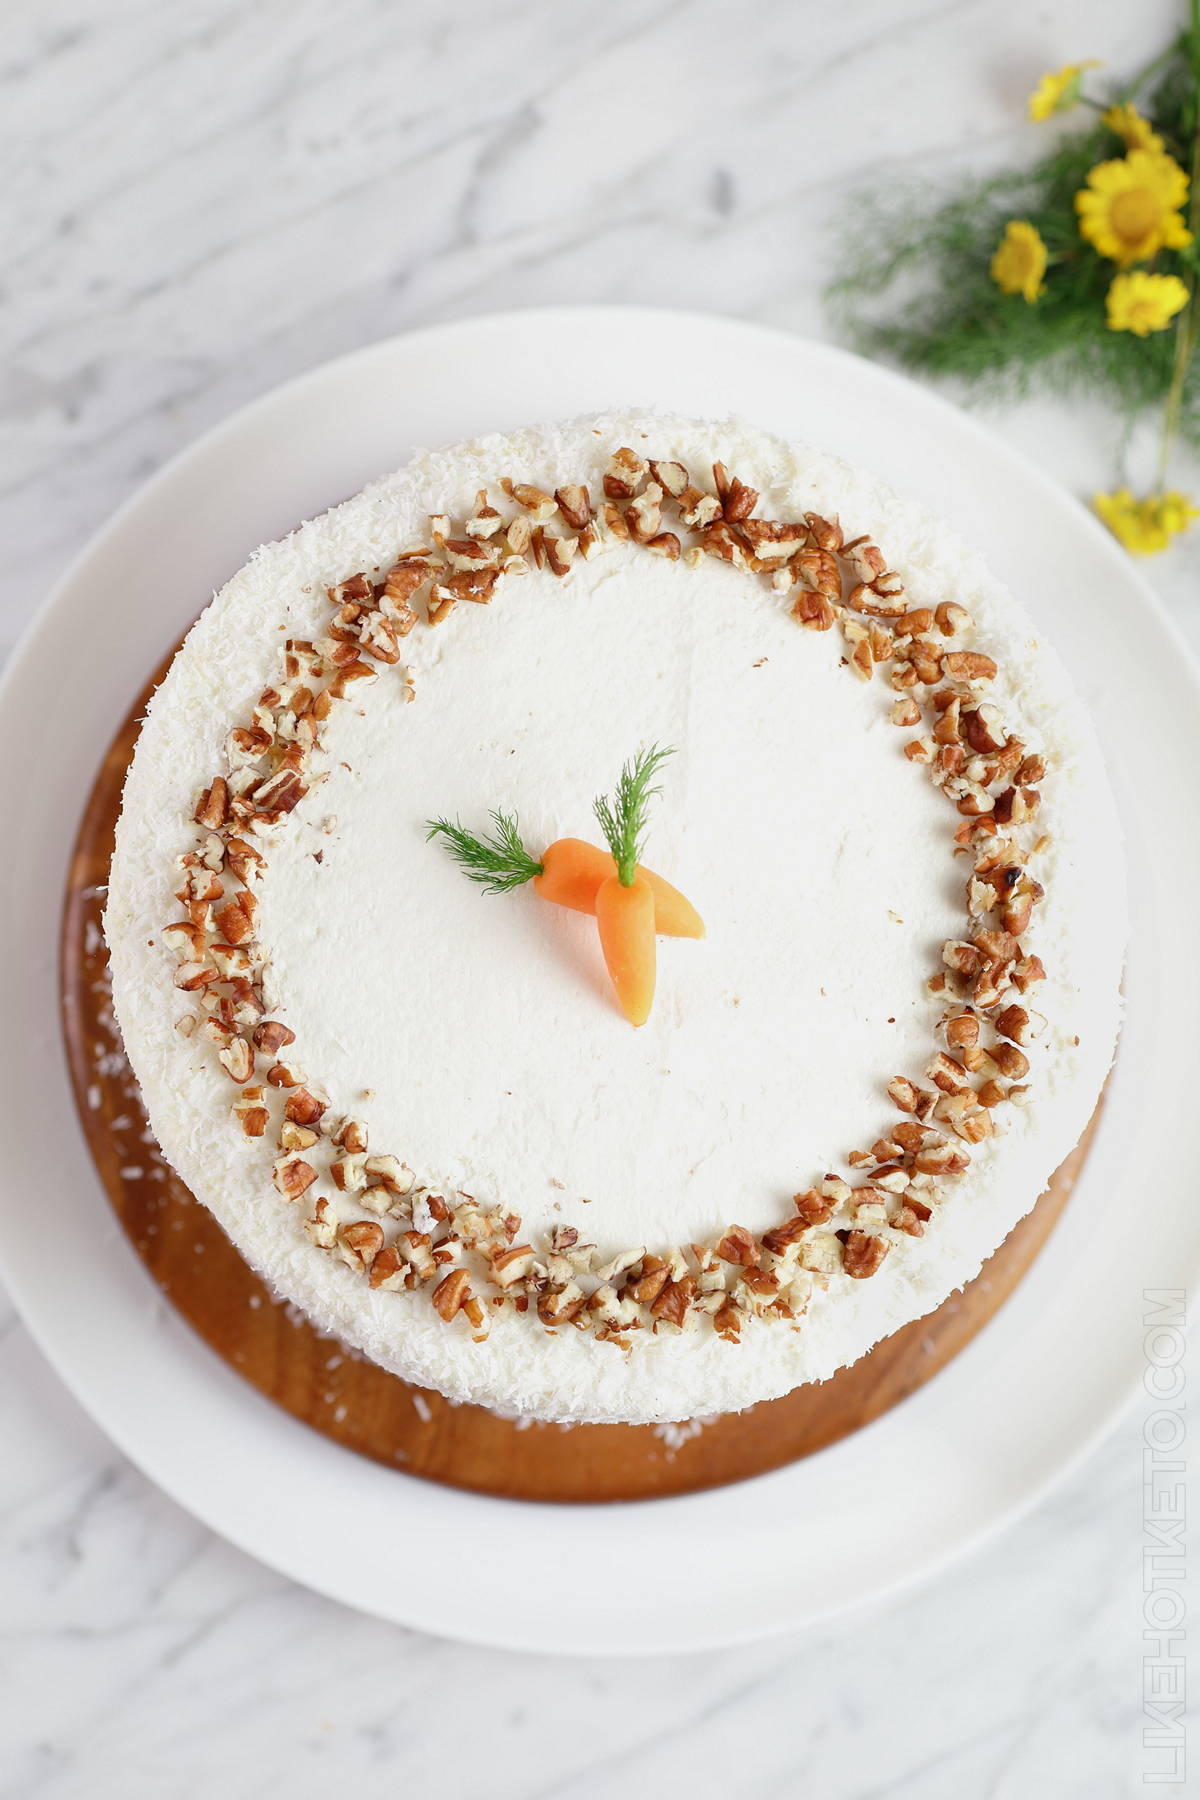 Keto carrot cake with white cream cheese frosting, fine shredded coconut and crushed pecans, with spring flowers on the side.